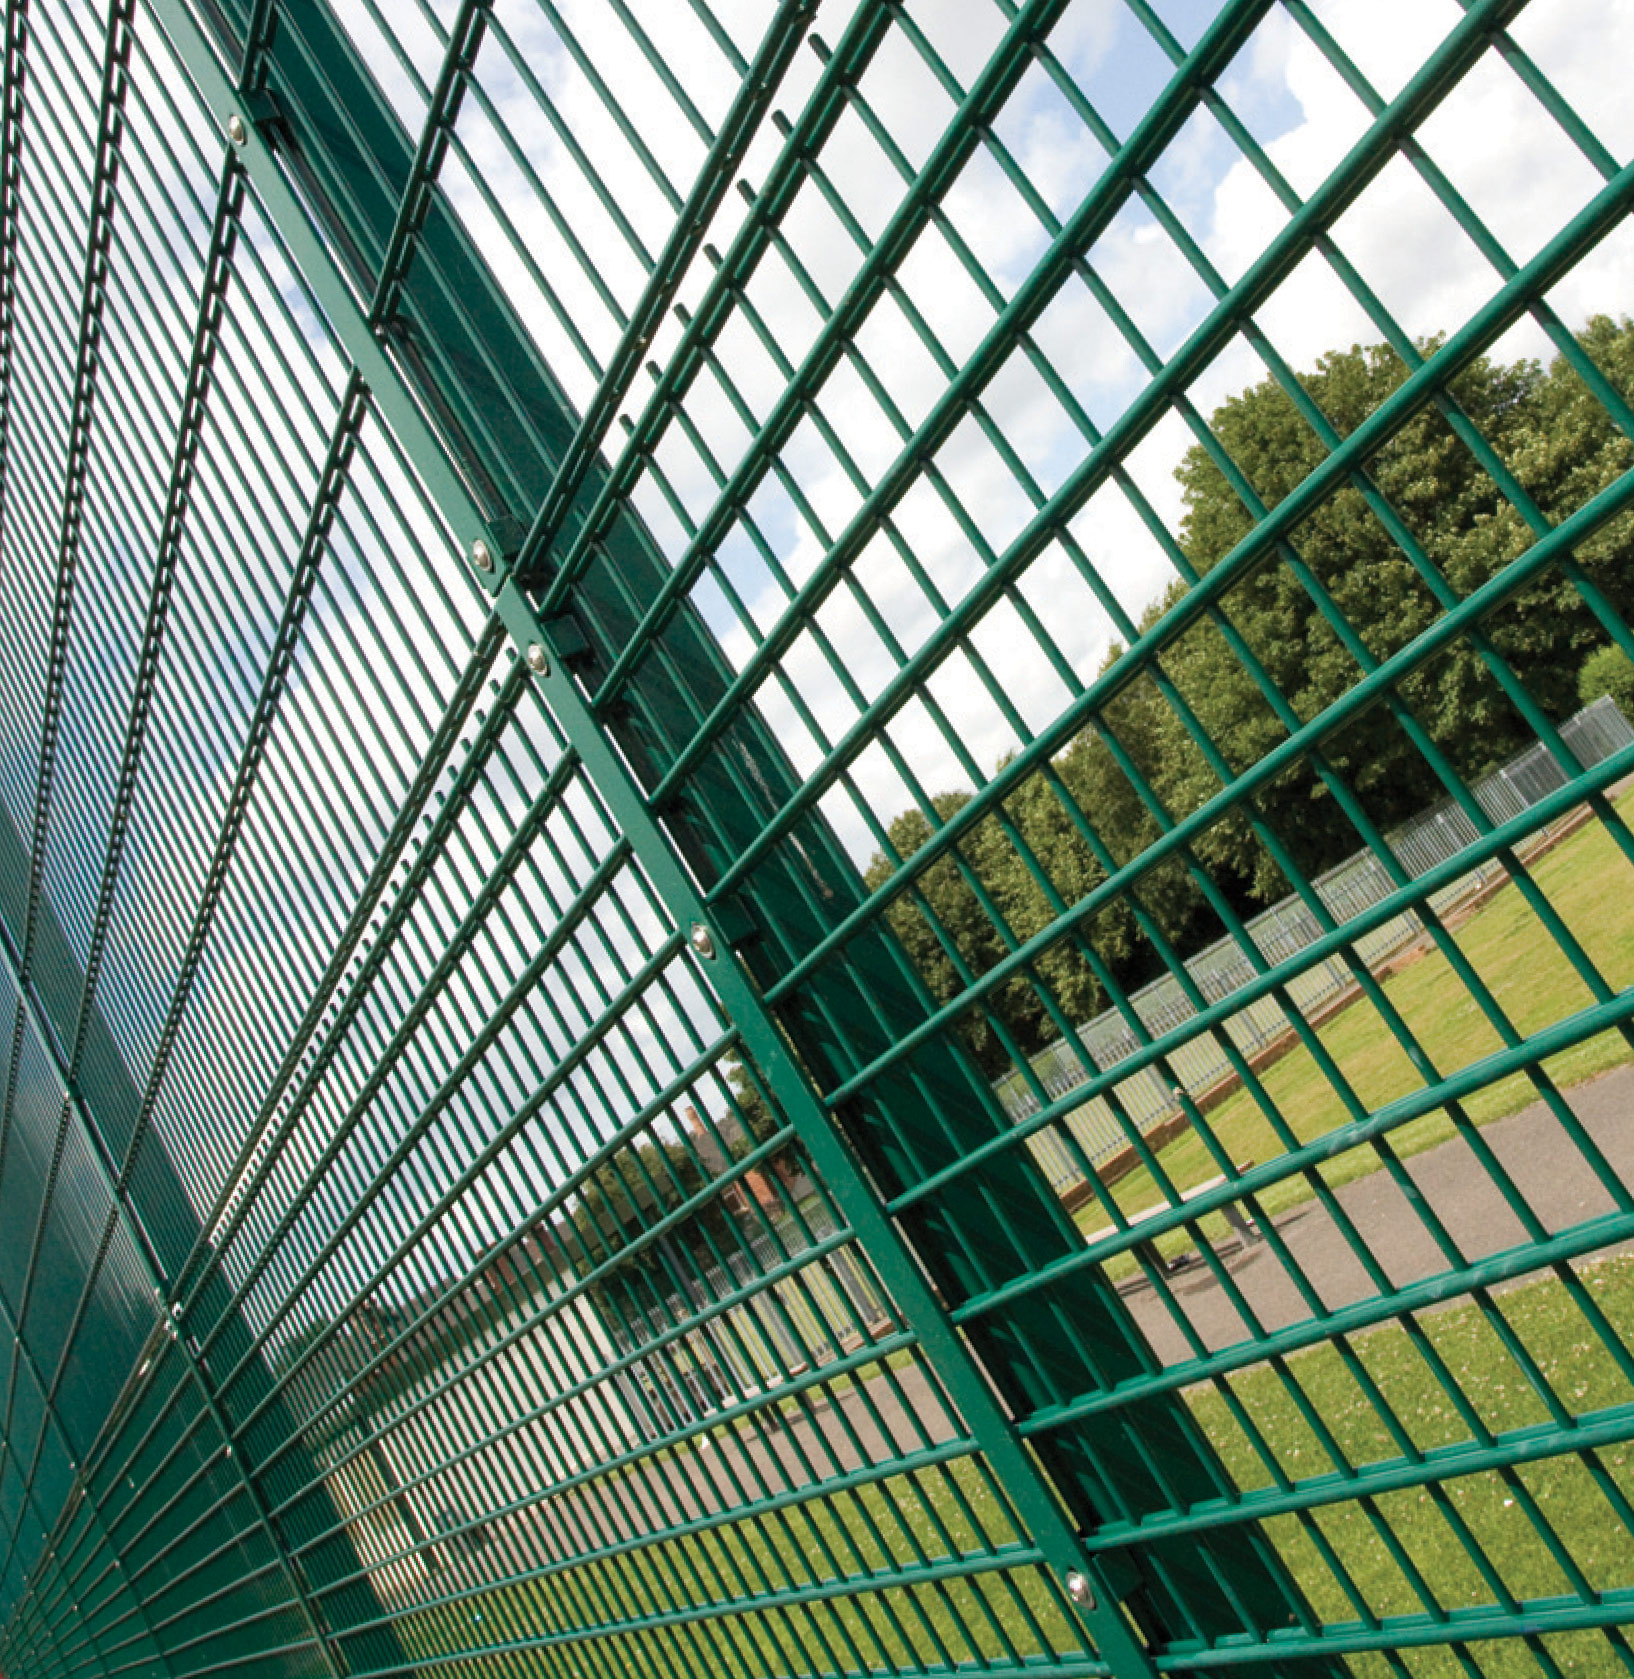 Fencing Mesh Types